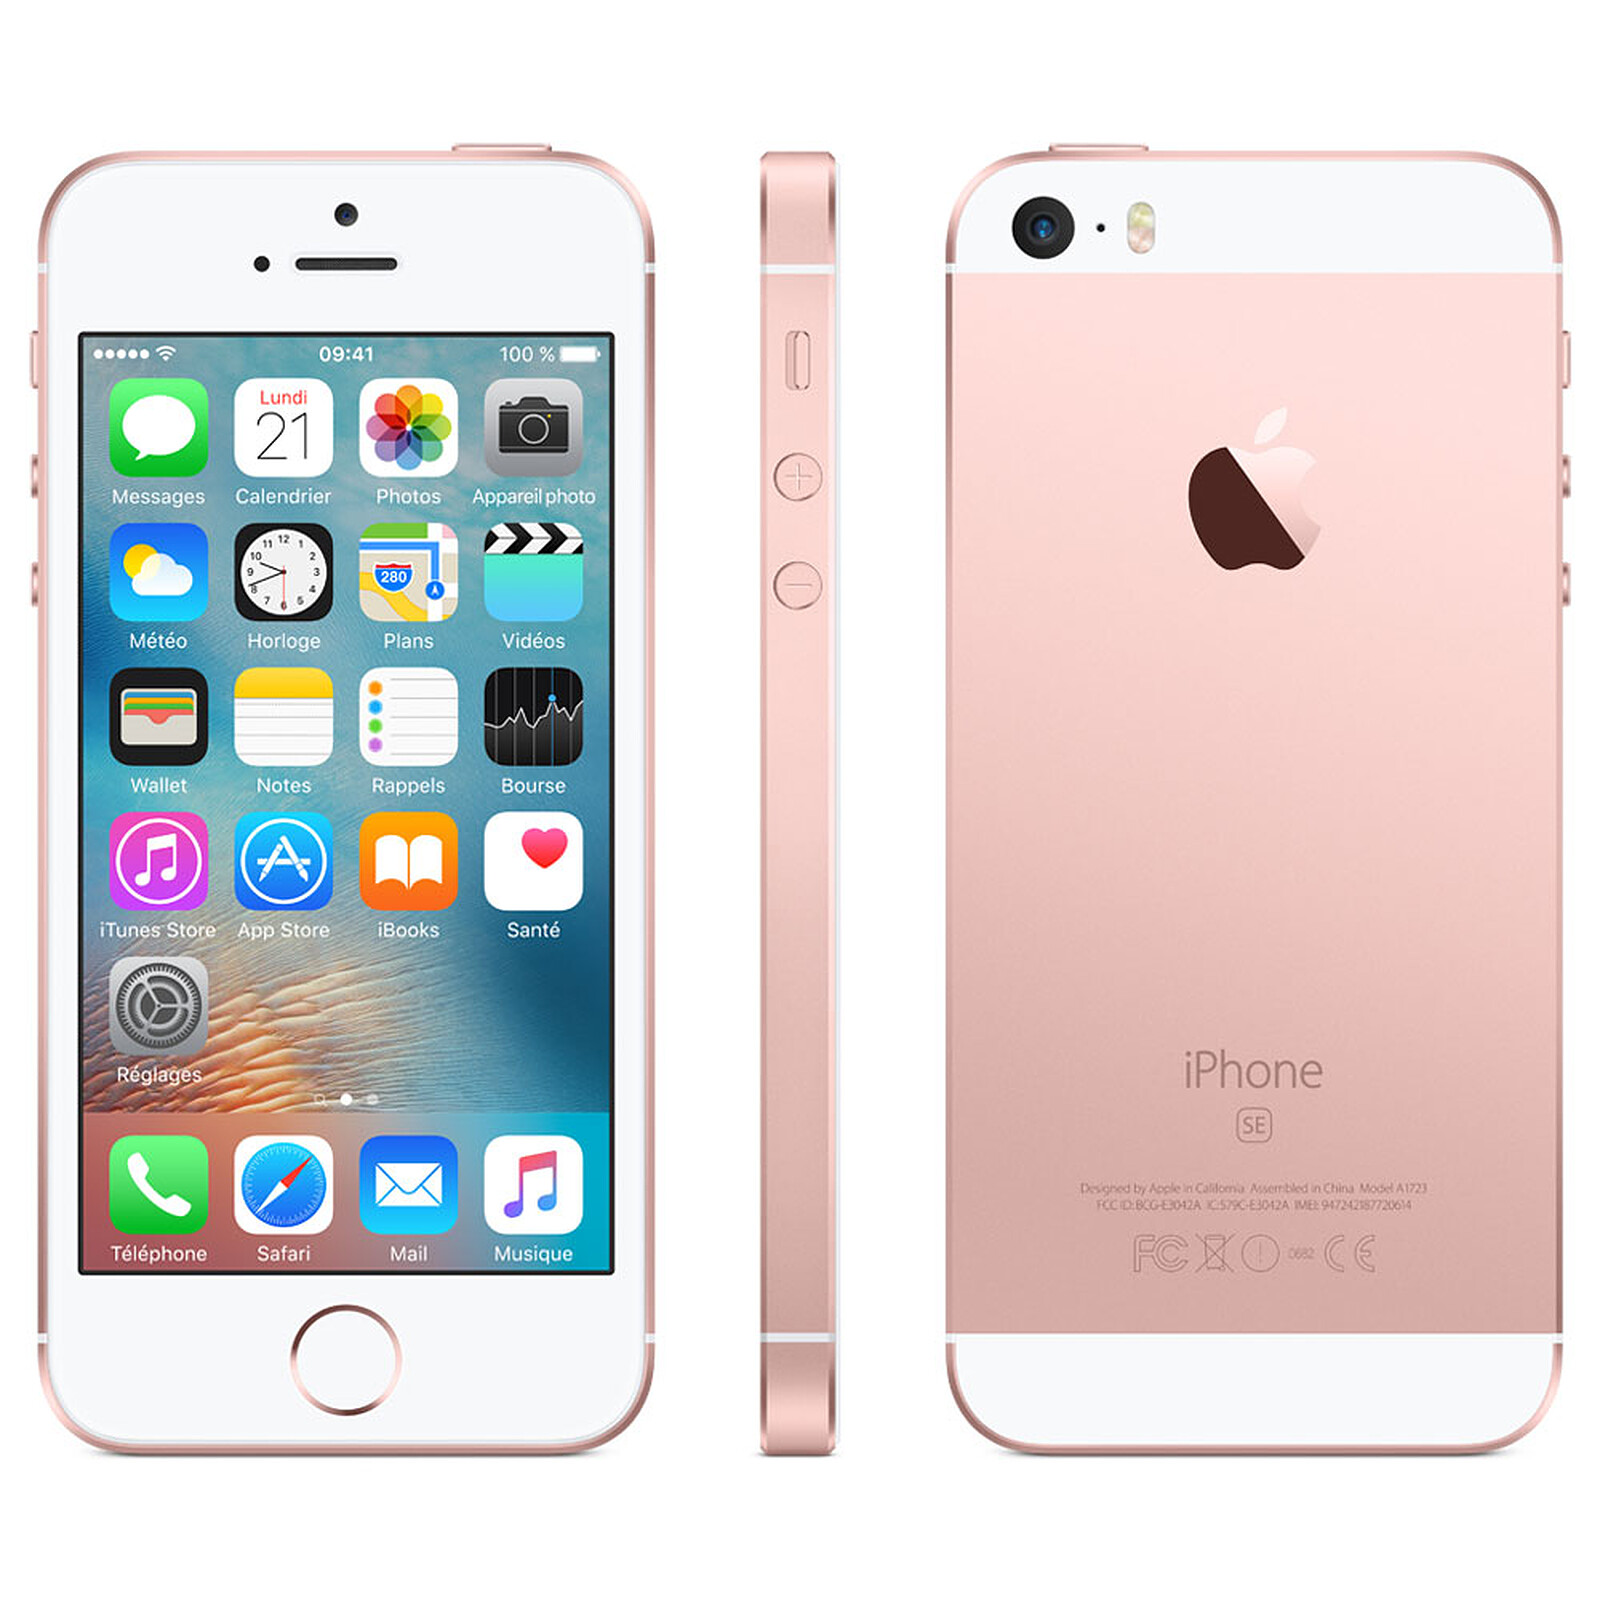 Apple iPhone 15 256 GB Pink - Mobile phone & smartphone - LDLC 3-year  warranty